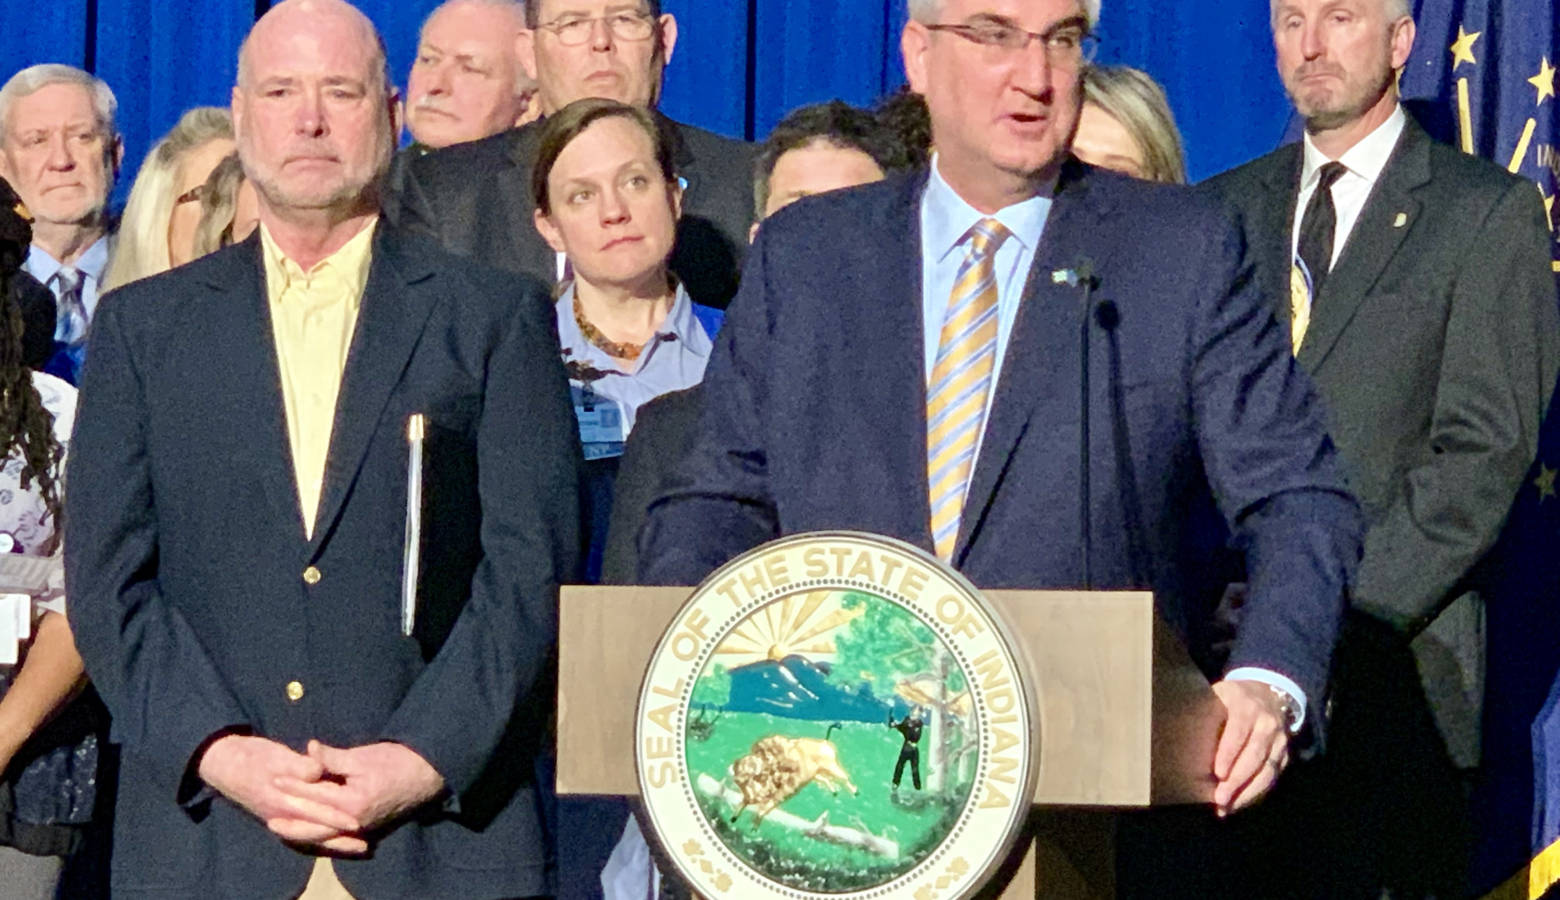 Gov. Eric Holcomb surrounded by Republican legislative leaders and state agency officials. (Brandon Smith/IPB News)